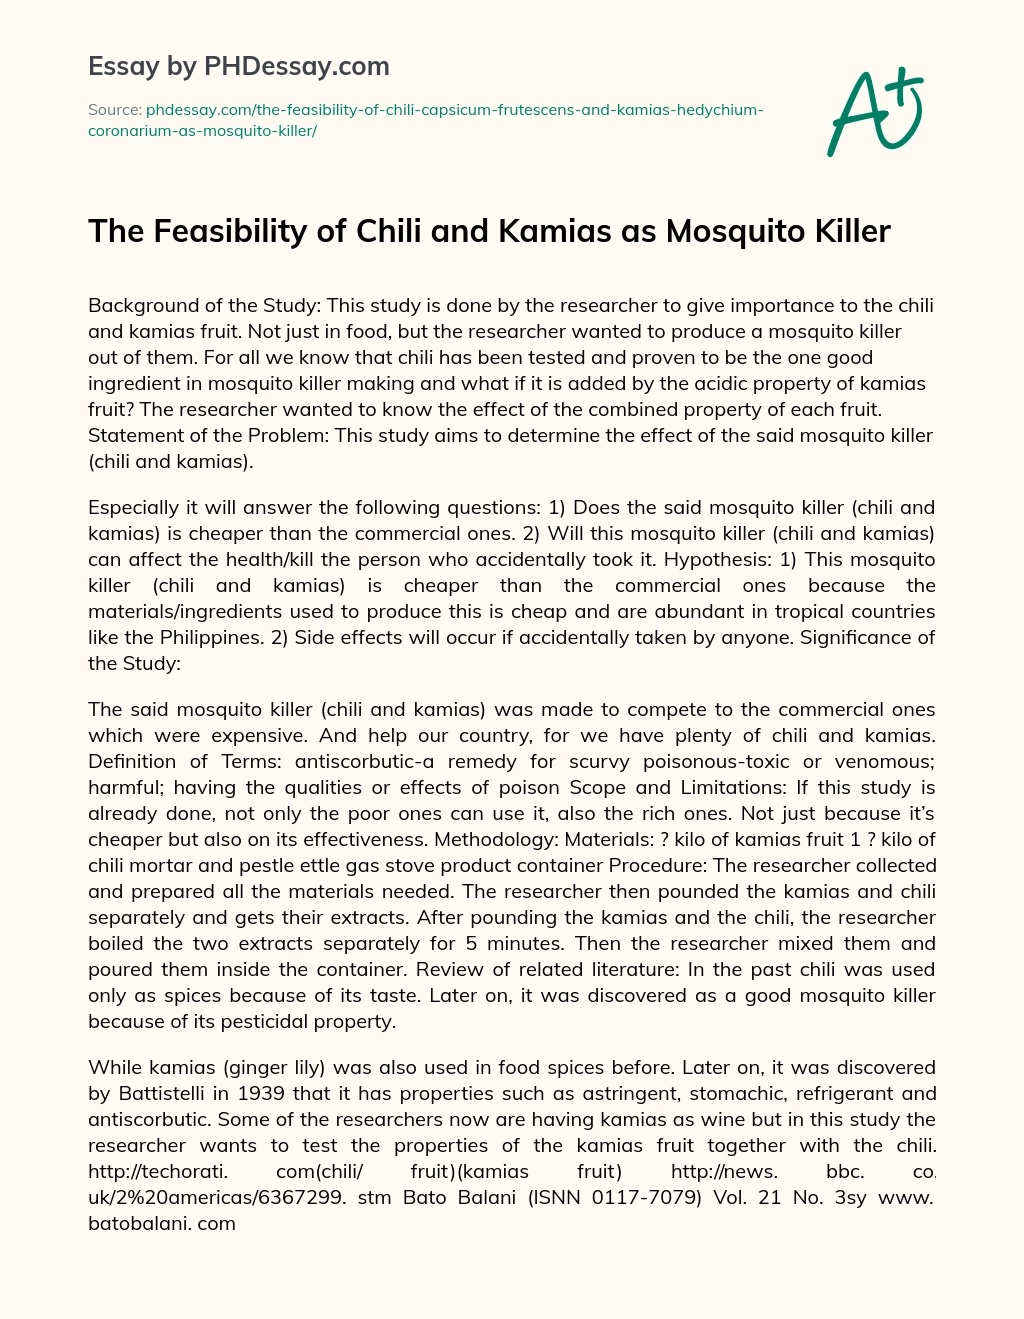 The Feasibility of Chili and Kamias as Mosquito Killer essay